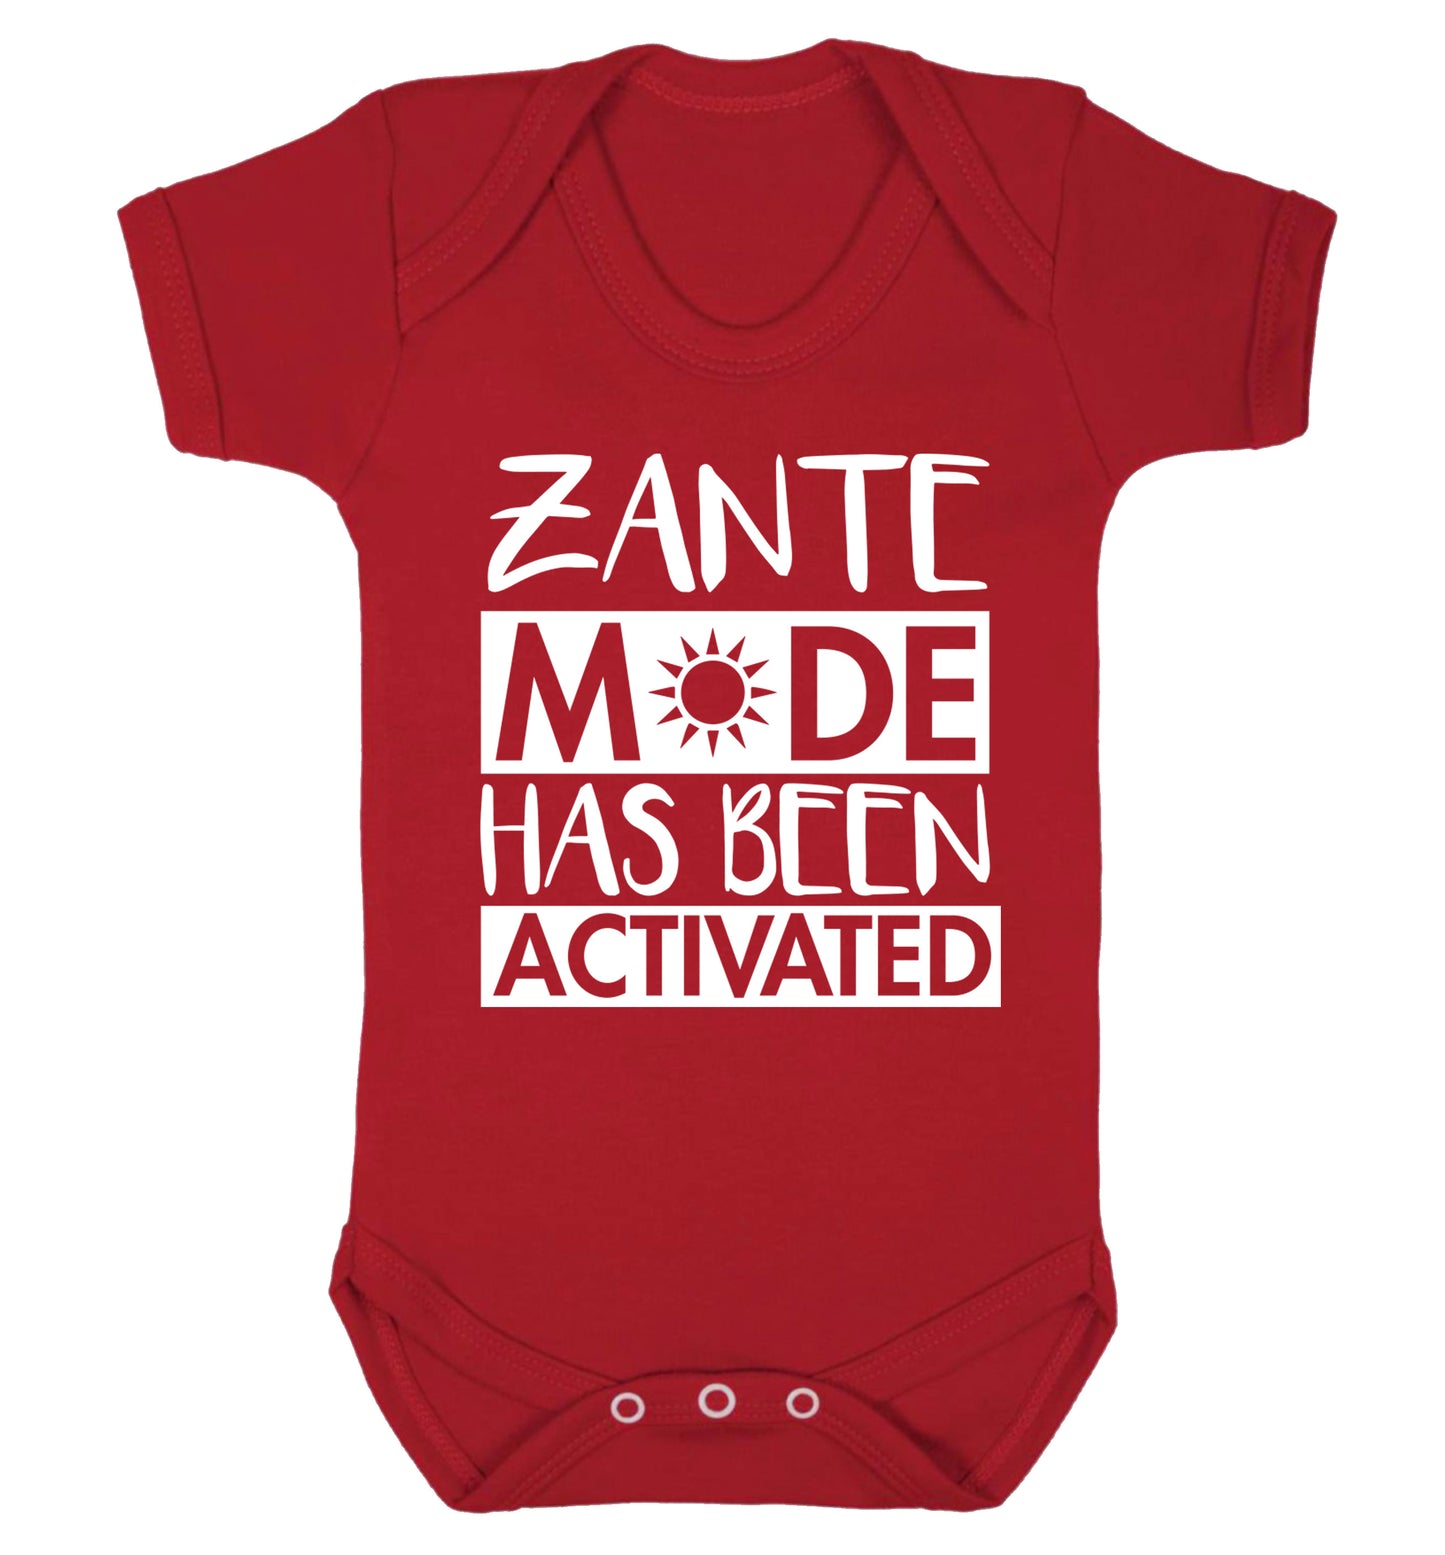 Zante mode has been activated Baby Vest red 18-24 months